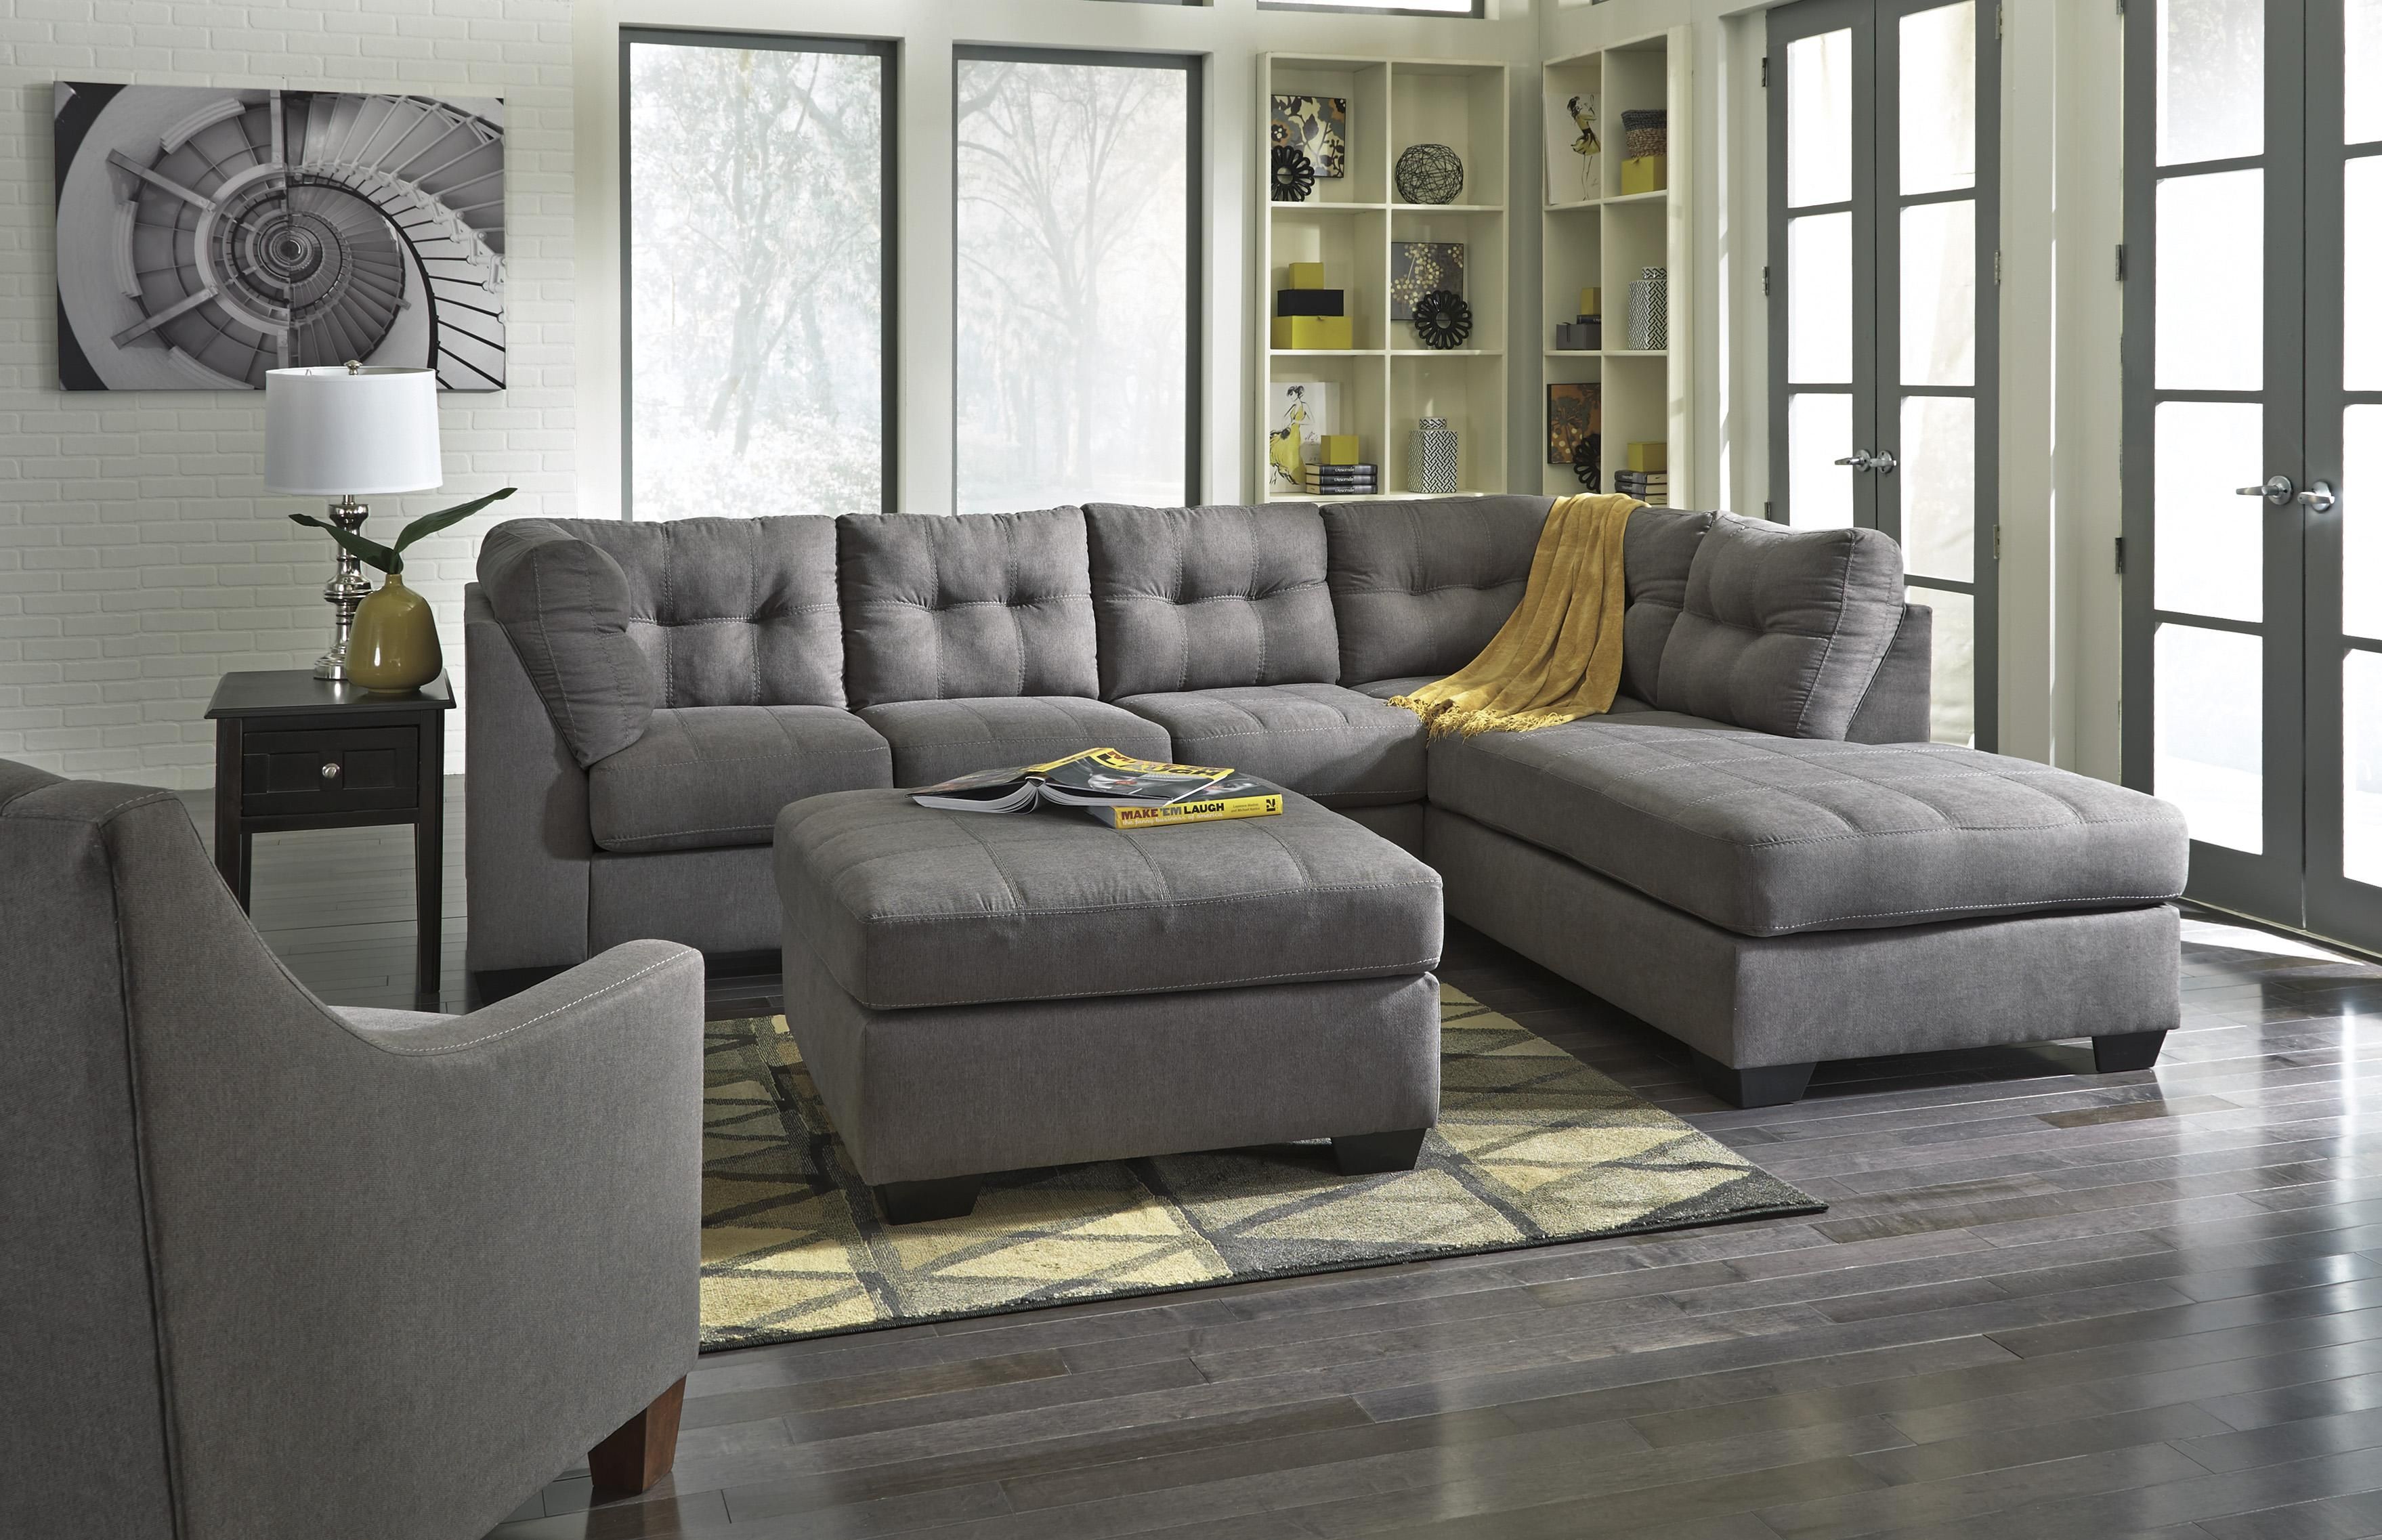 Decor Fascinating Benchcraft Sofa With Luxury Shapes For Living With Regard To Berkline Sectional Sofa (Photo 4 of 15)